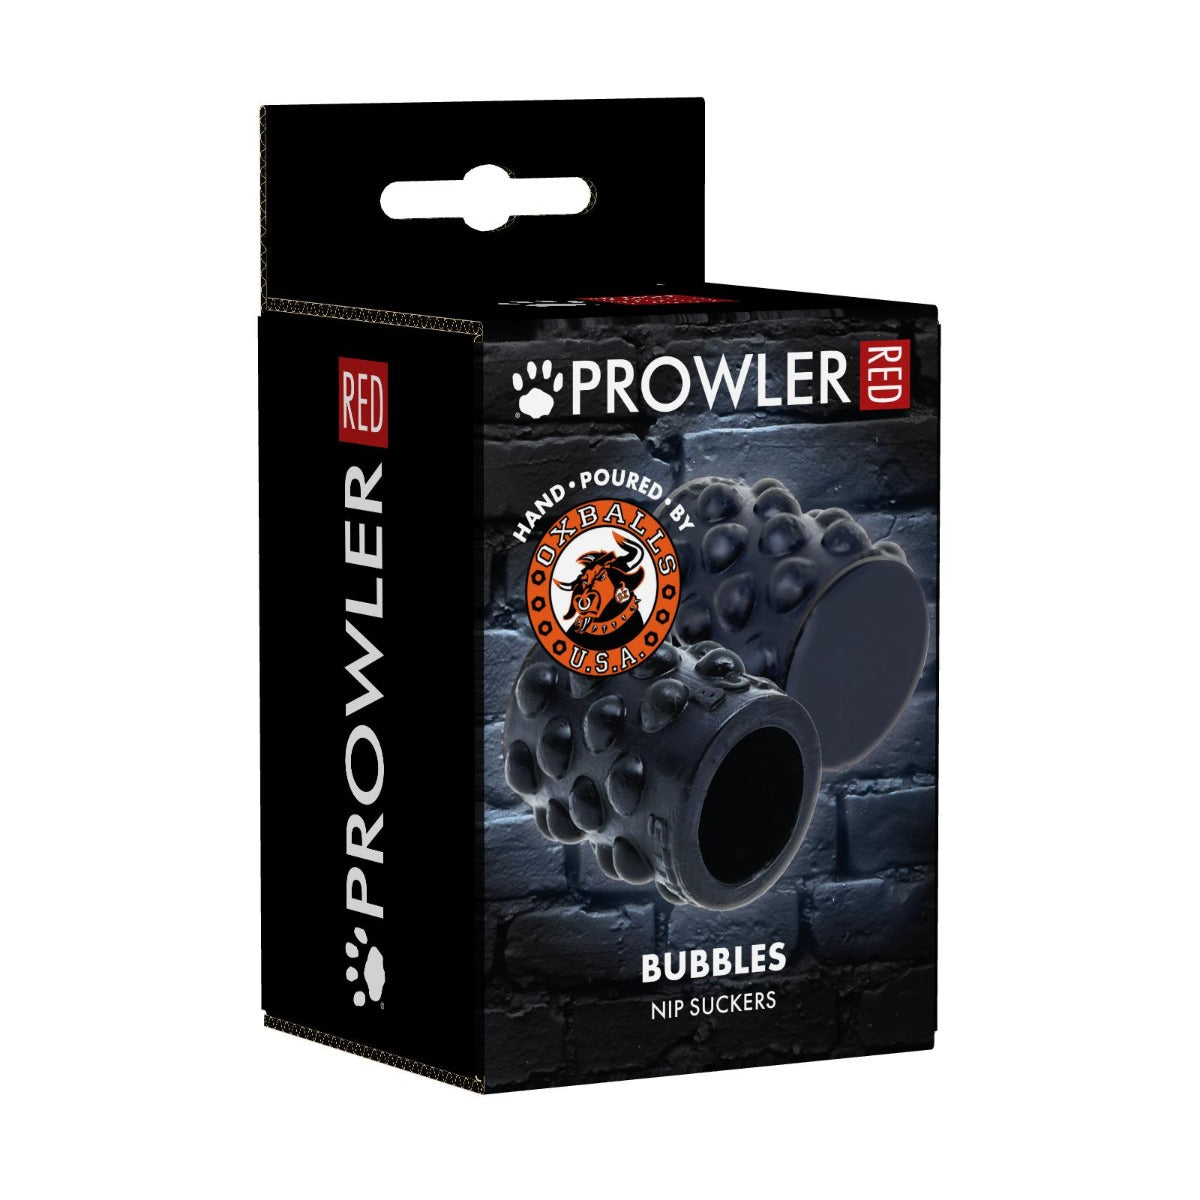 Prowler RED BUBBLES by Oxballs (7020929941668)